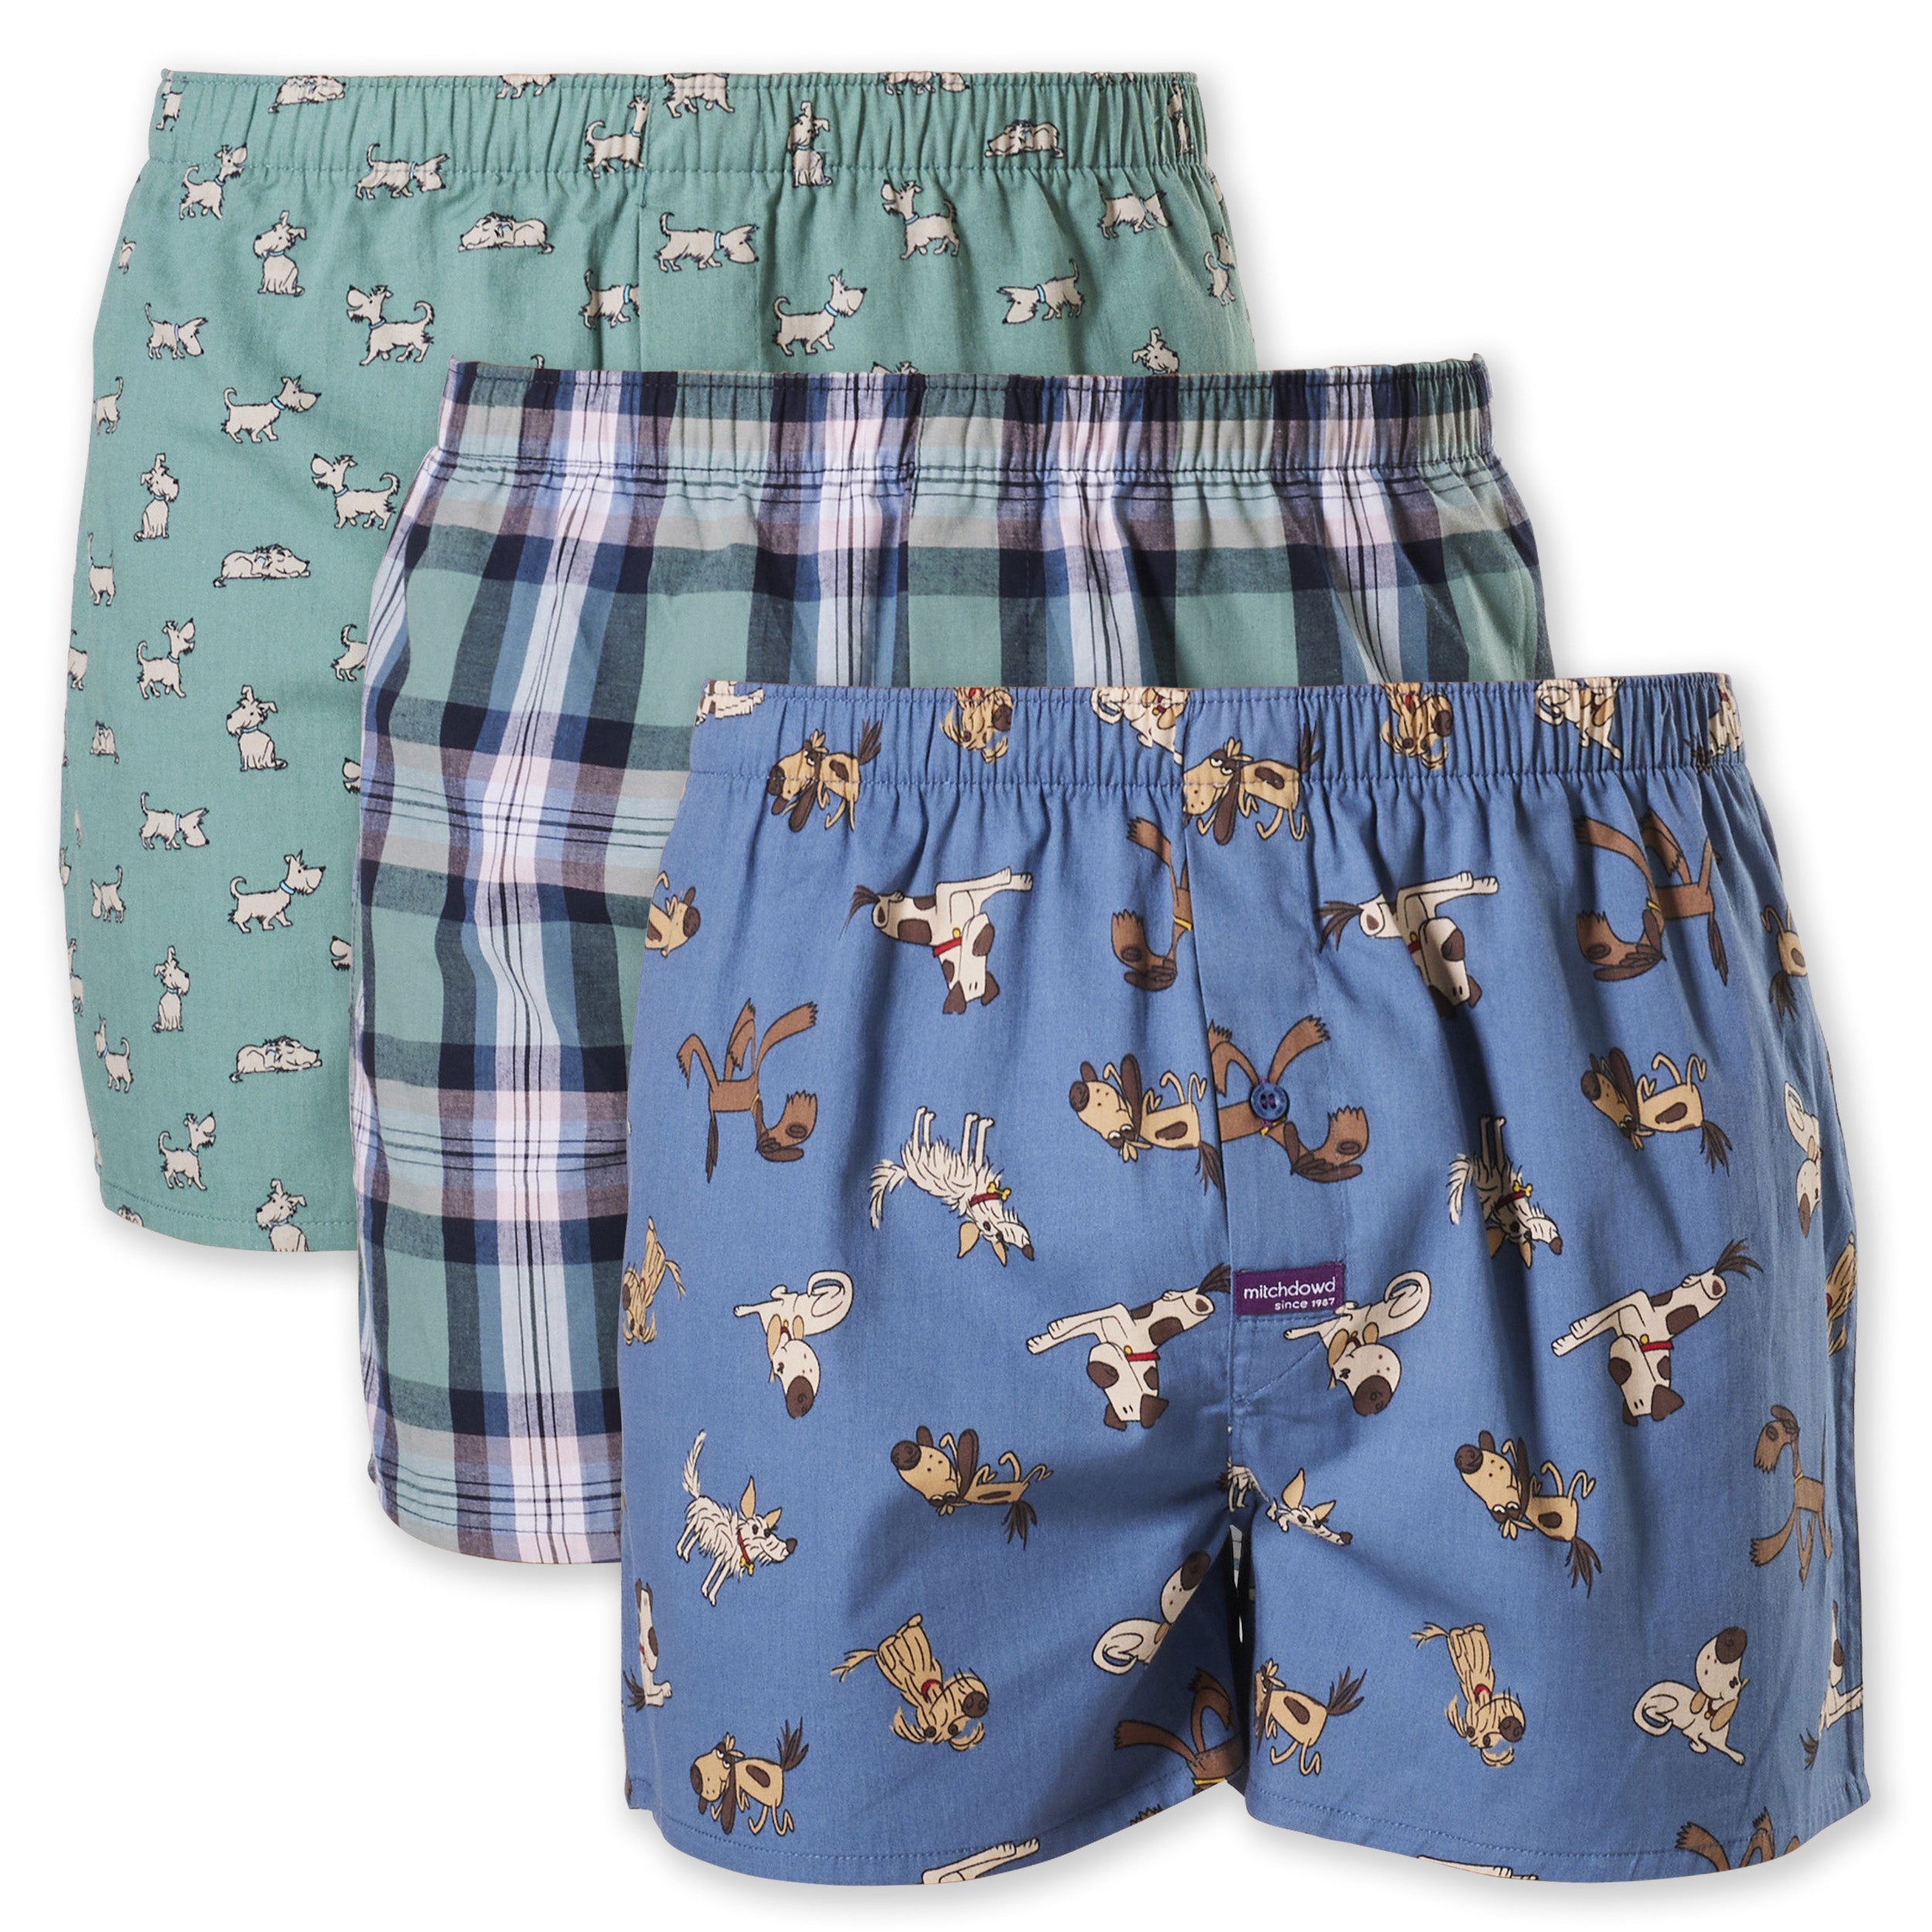 Men's Digging Dogs Cotton Woven Boxer Shorts 3 Pack